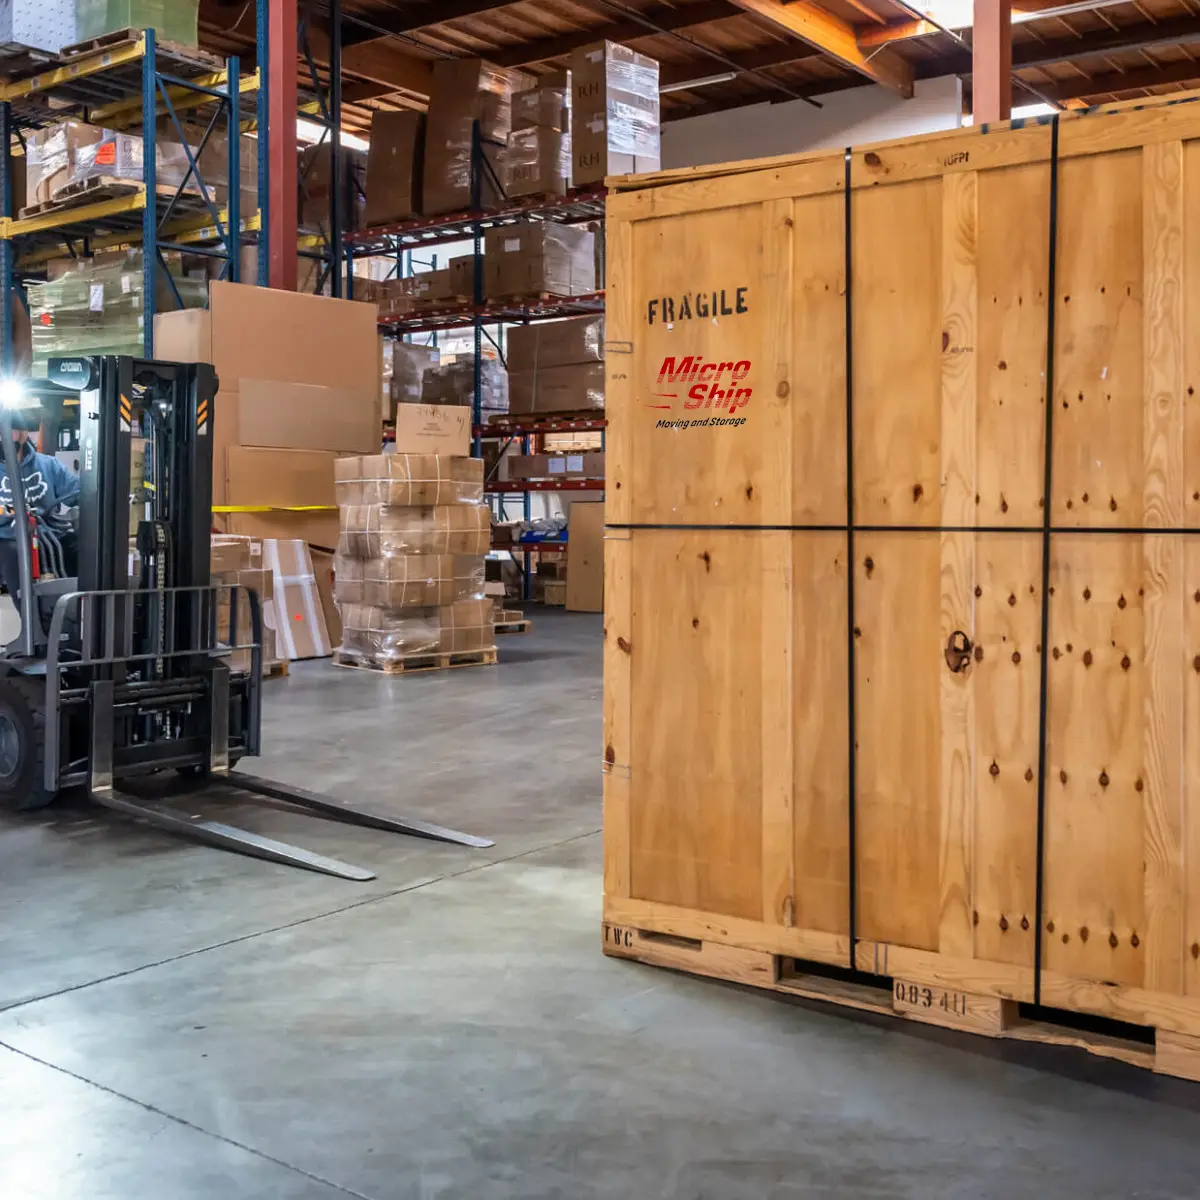 A forklift is moving a large wooden crate in a warehouse